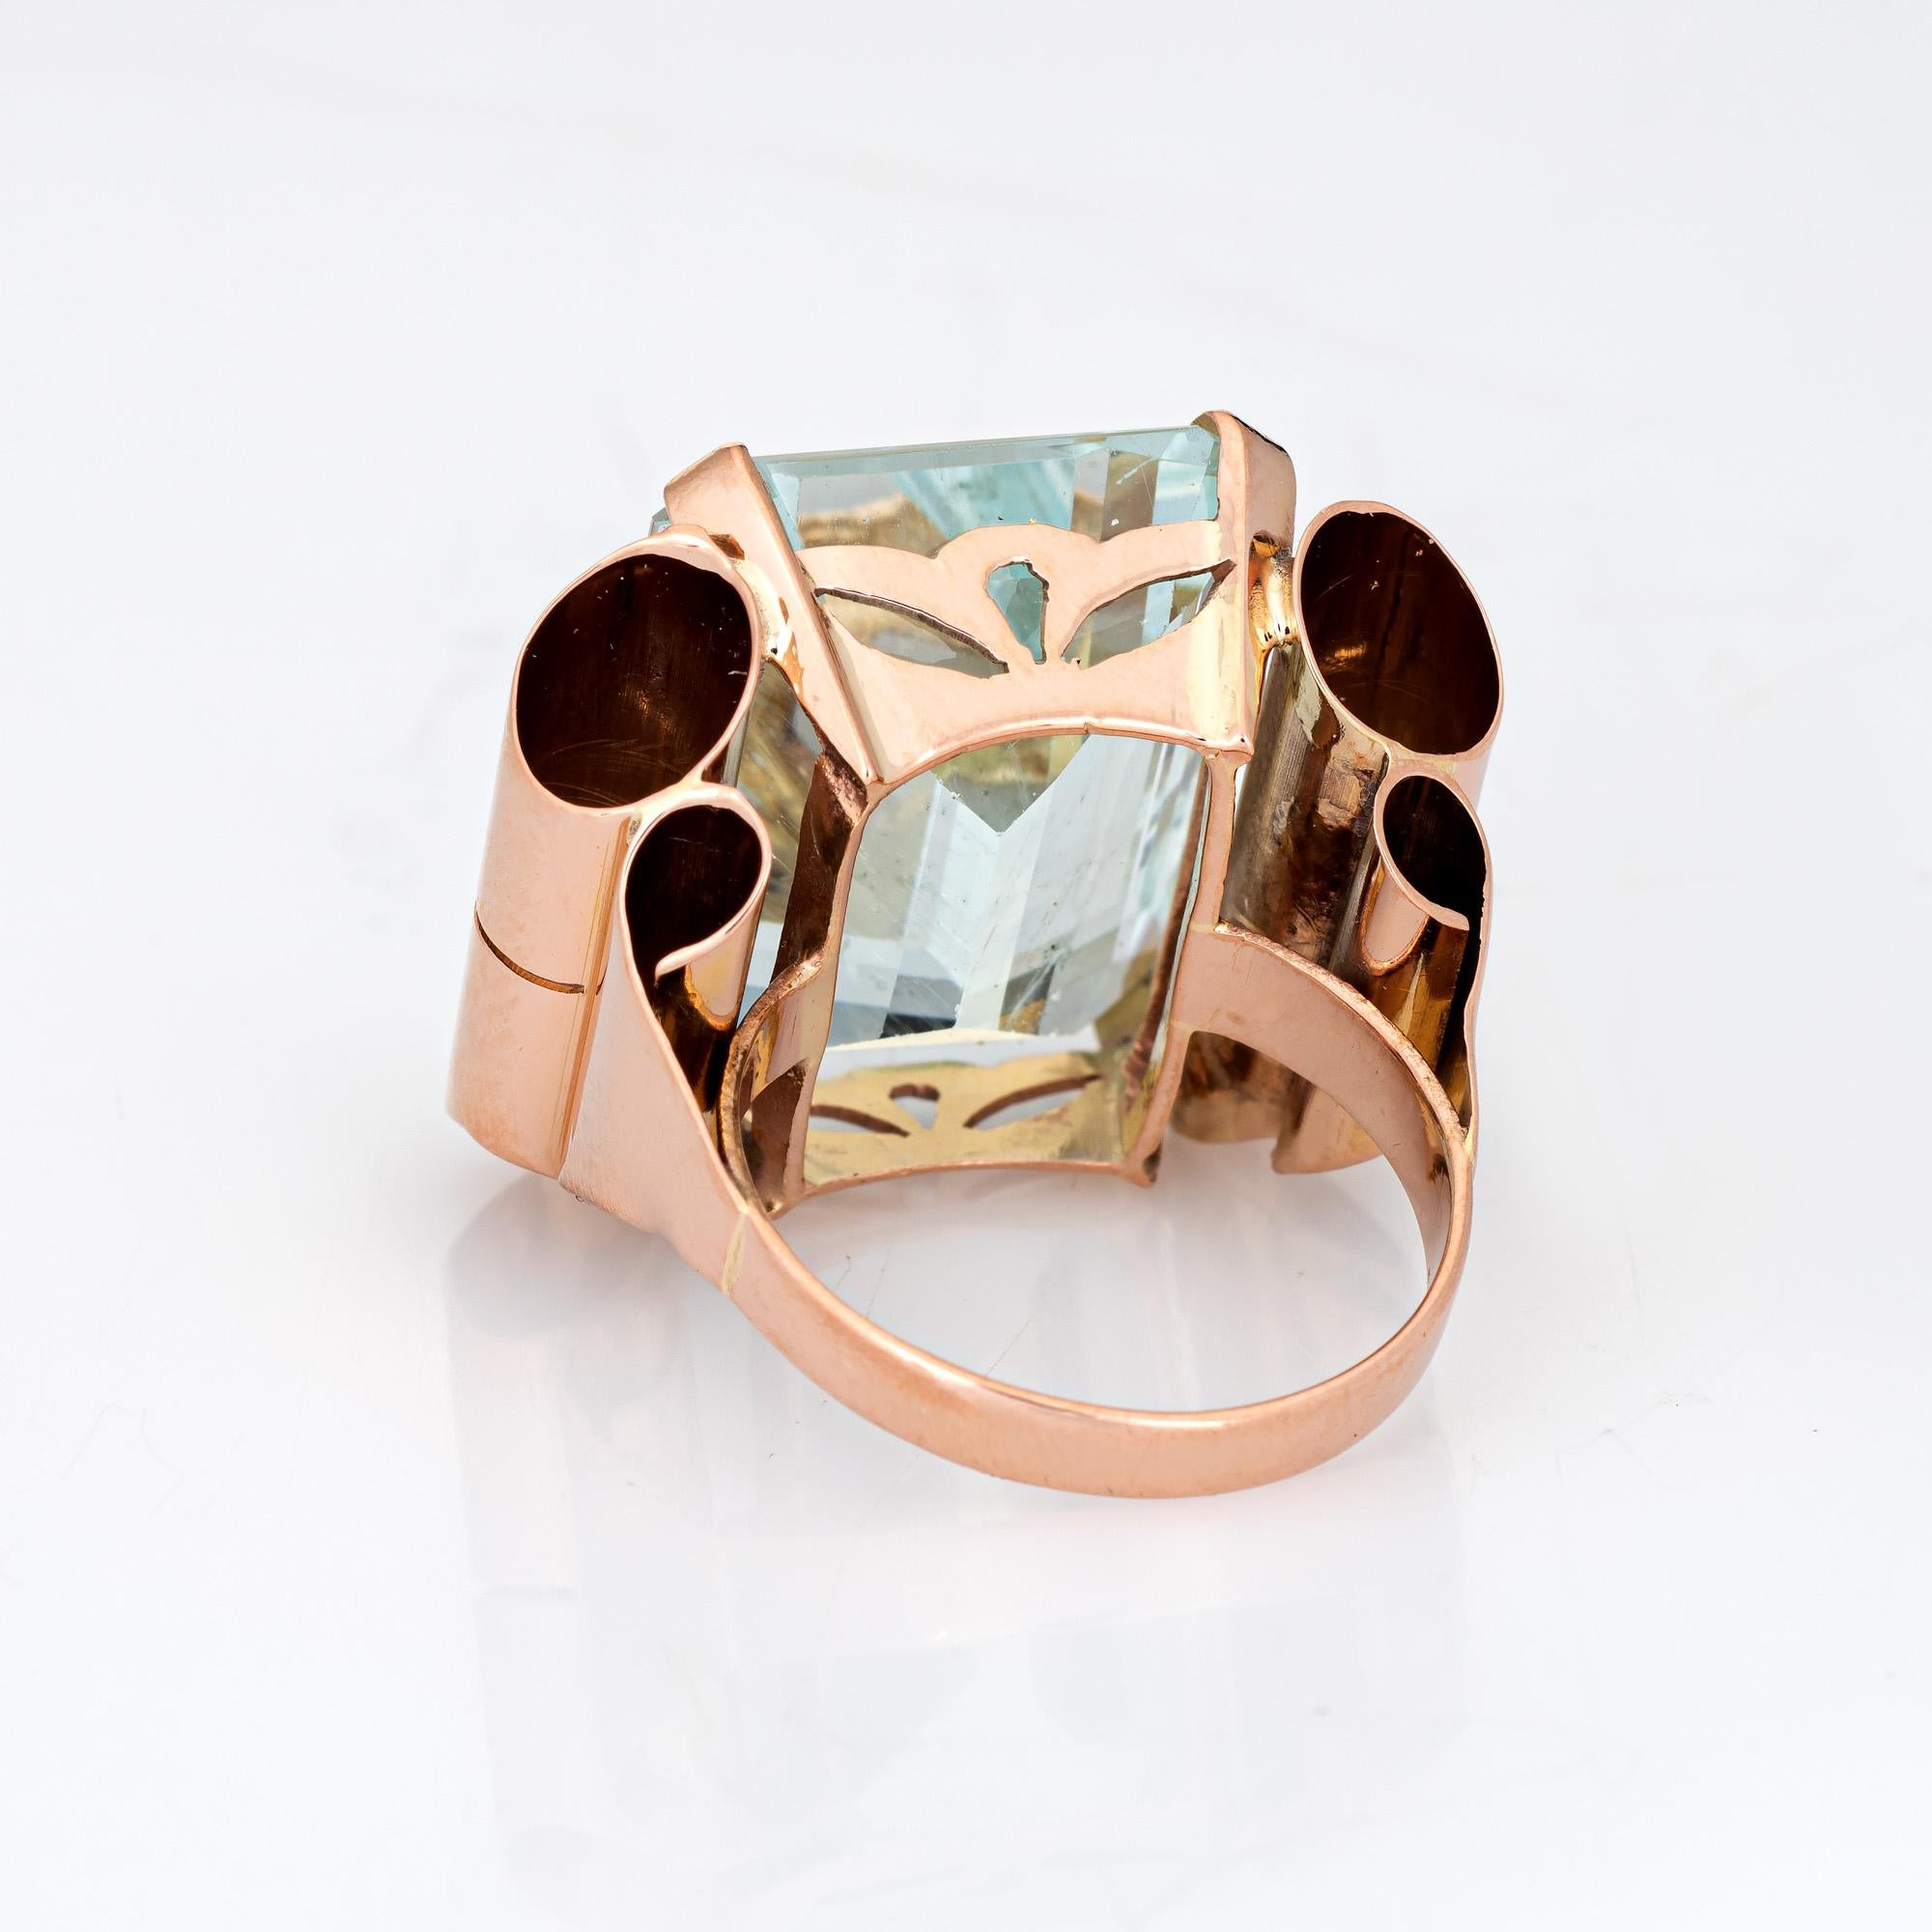 Retro 20ct Aquamarine Ring Vintage 14k Rose Gold Cocktail Jewelry Sz 5  In Good Condition For Sale In Torrance, CA